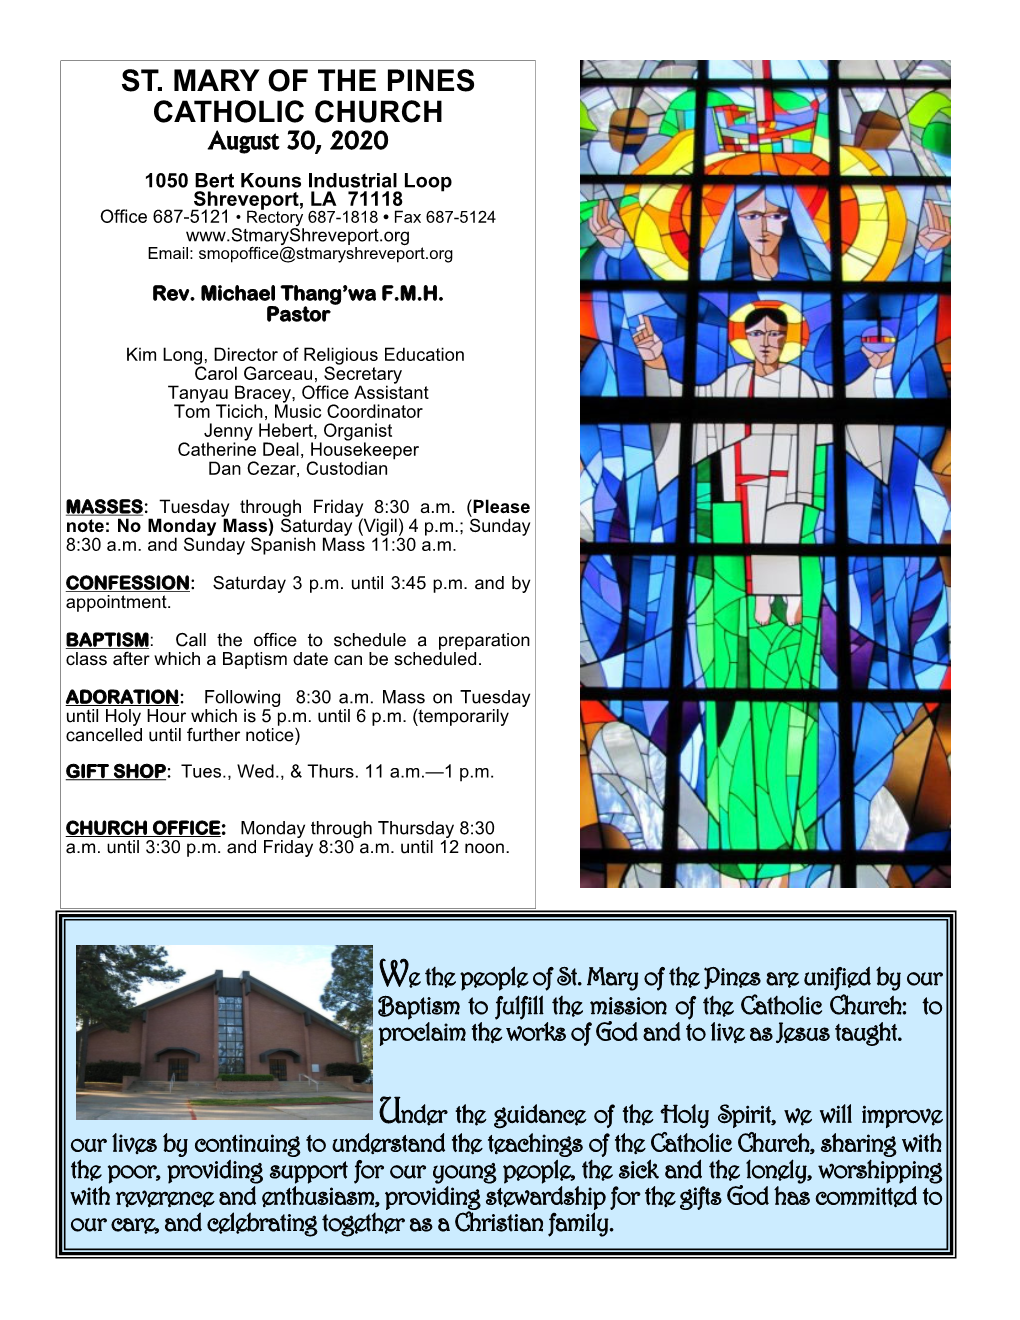 ST. MARY of the PINES CATHOLIC CHURCH August 30, 2020